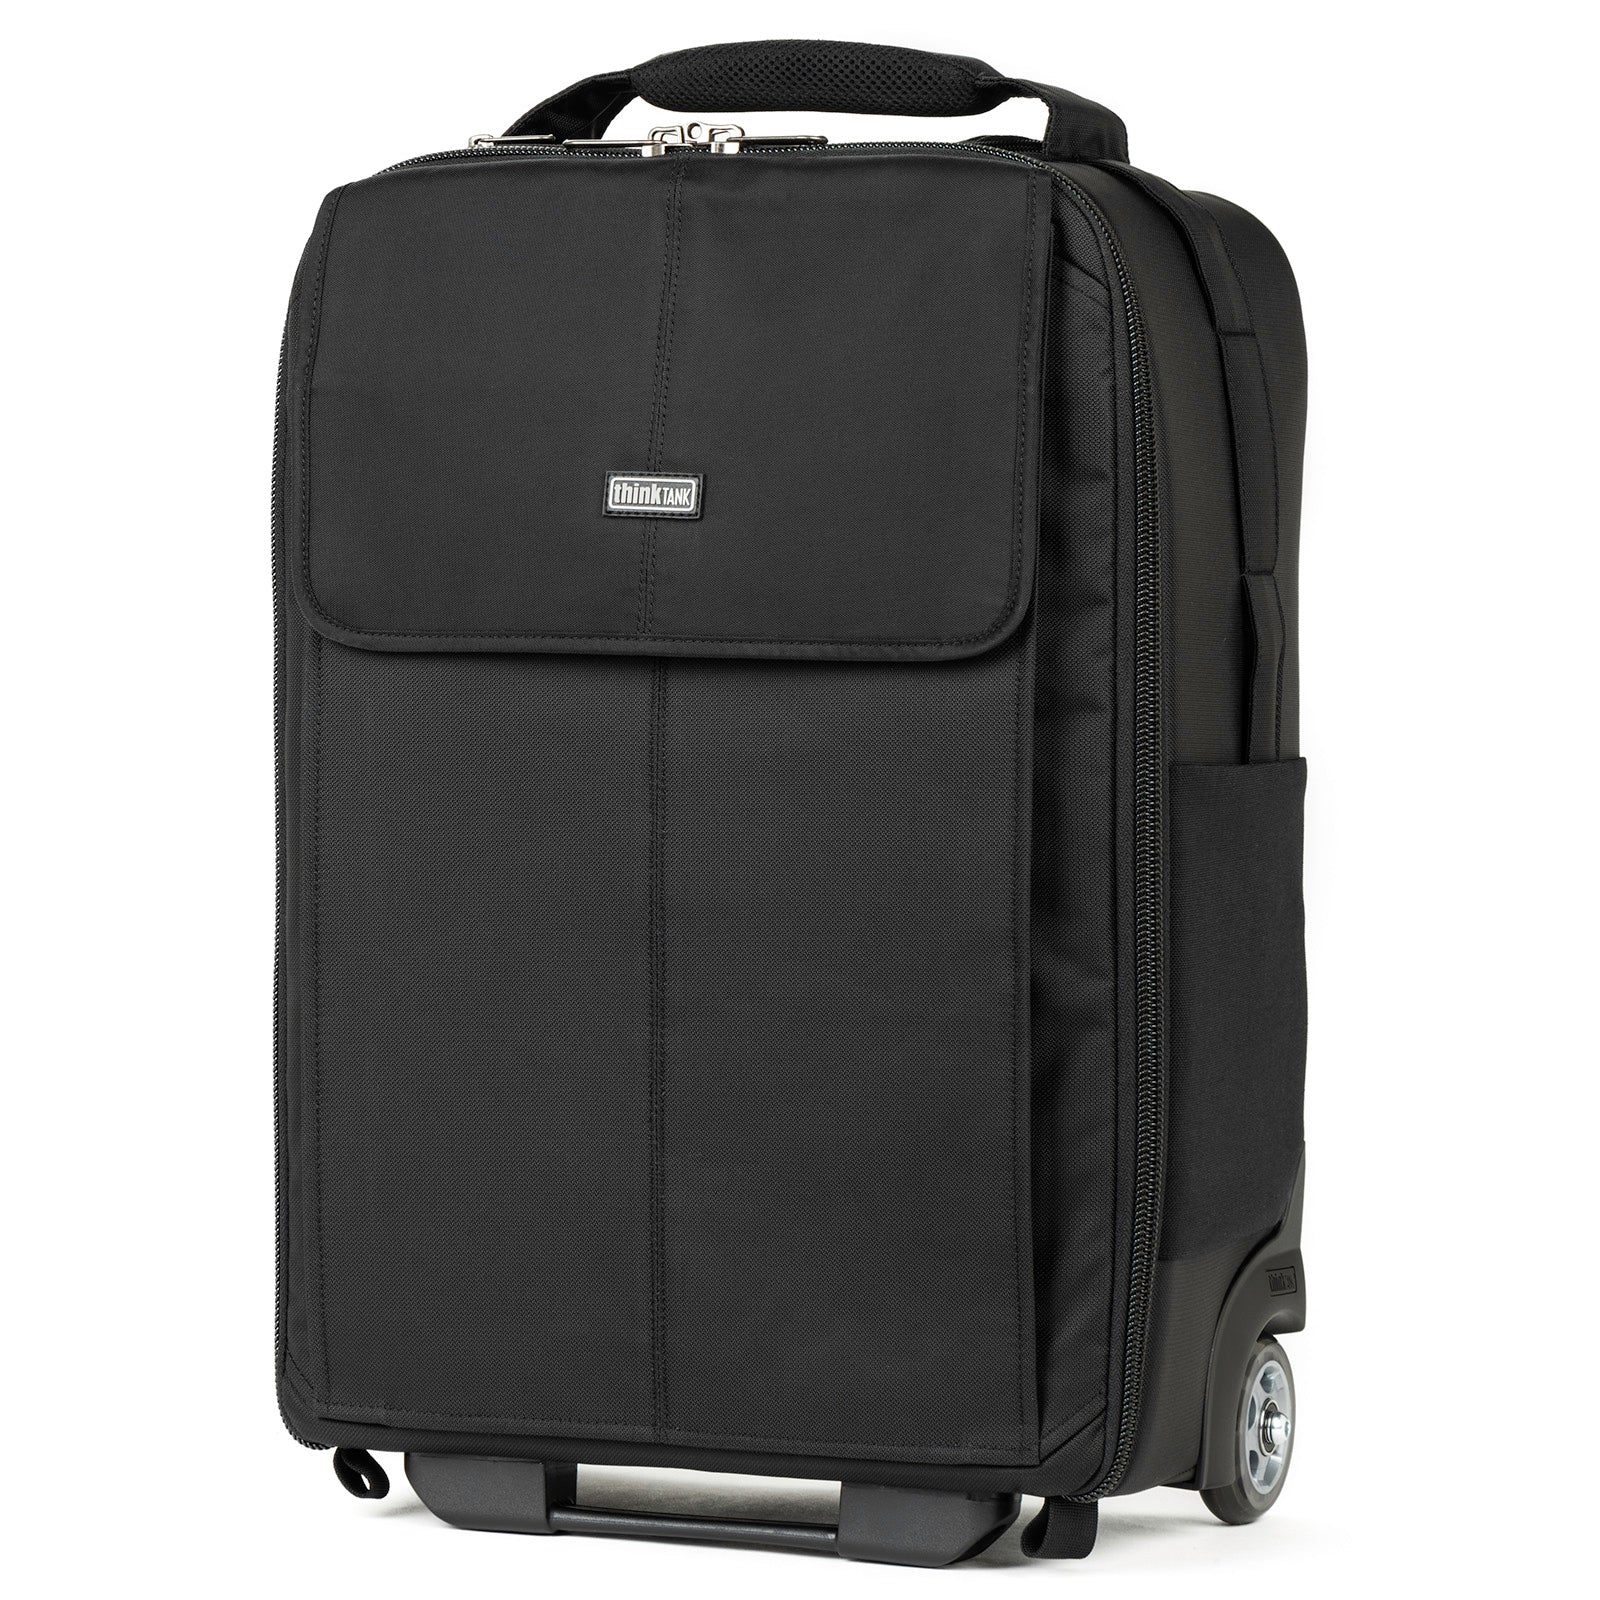 Ultra-lightweight design weighs only 7.5 lbs. (3.4 kg), keeping your bag under weight restrictions. Shown in black